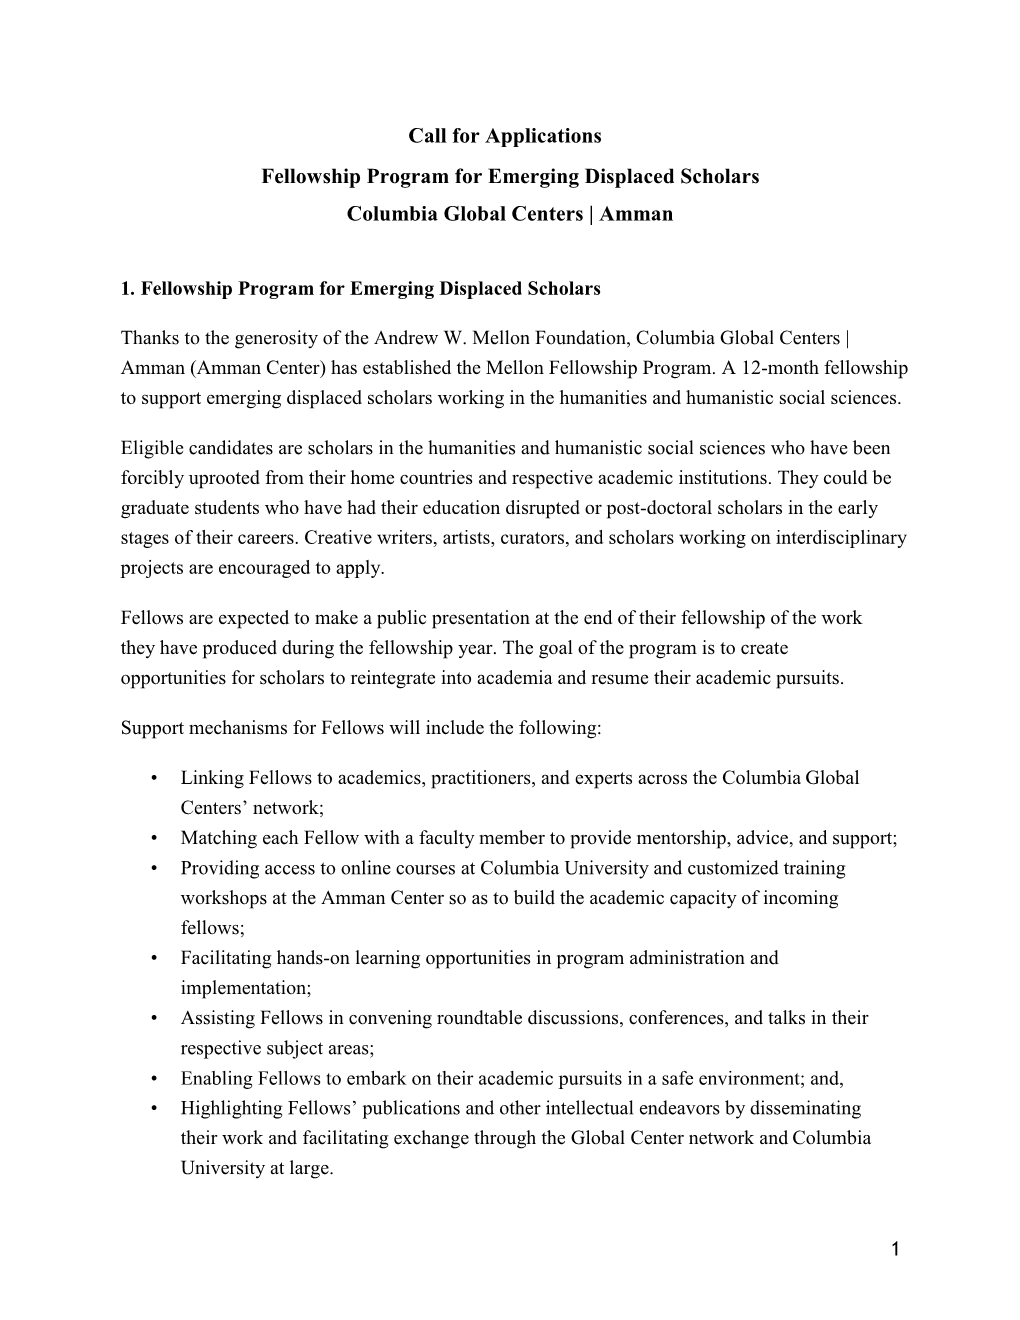 Call for Applications Fellowship Program for Emerging Displaced Scholars Columbia Global Centers | Amman